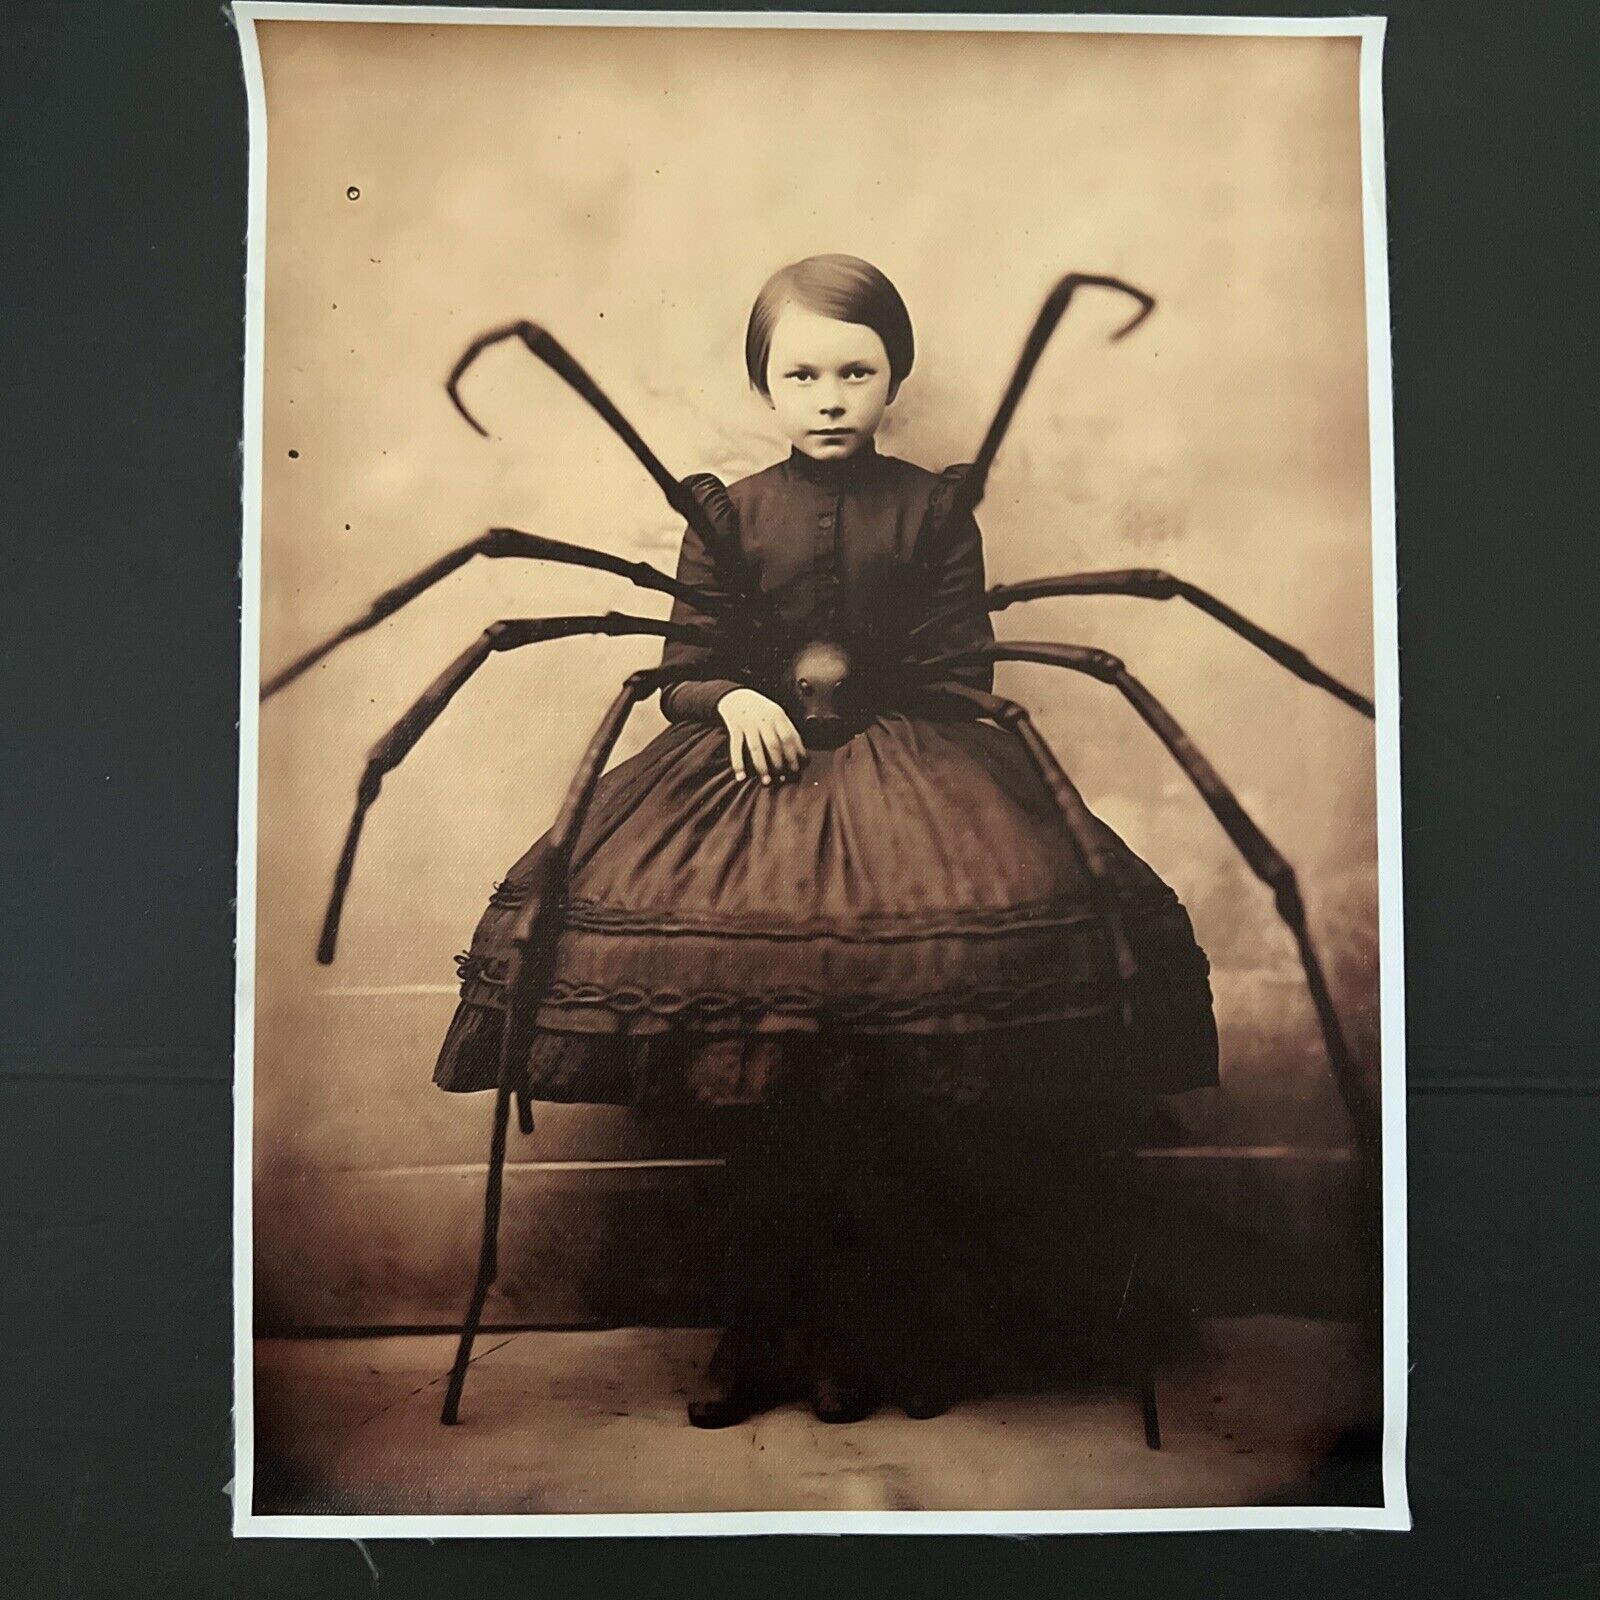 Creepy Halloween Pet Spider Picture 16”x12” No Frame